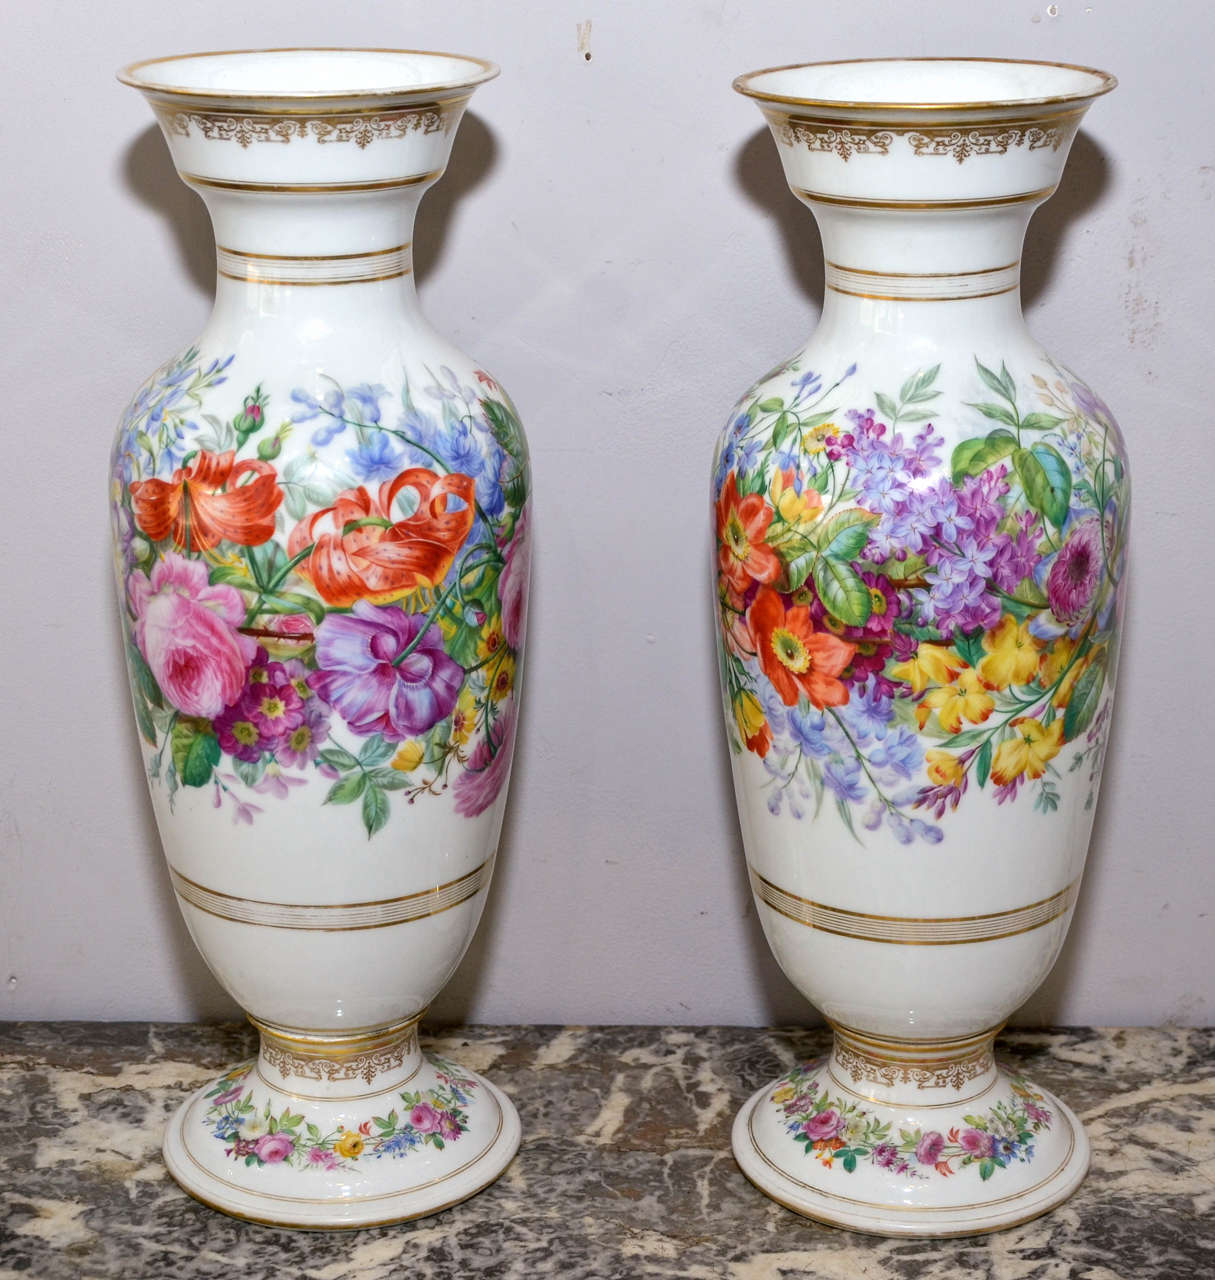 Two vases by Porcelaine de Paris, hand-painted with floral decor and gilded patina highlights.